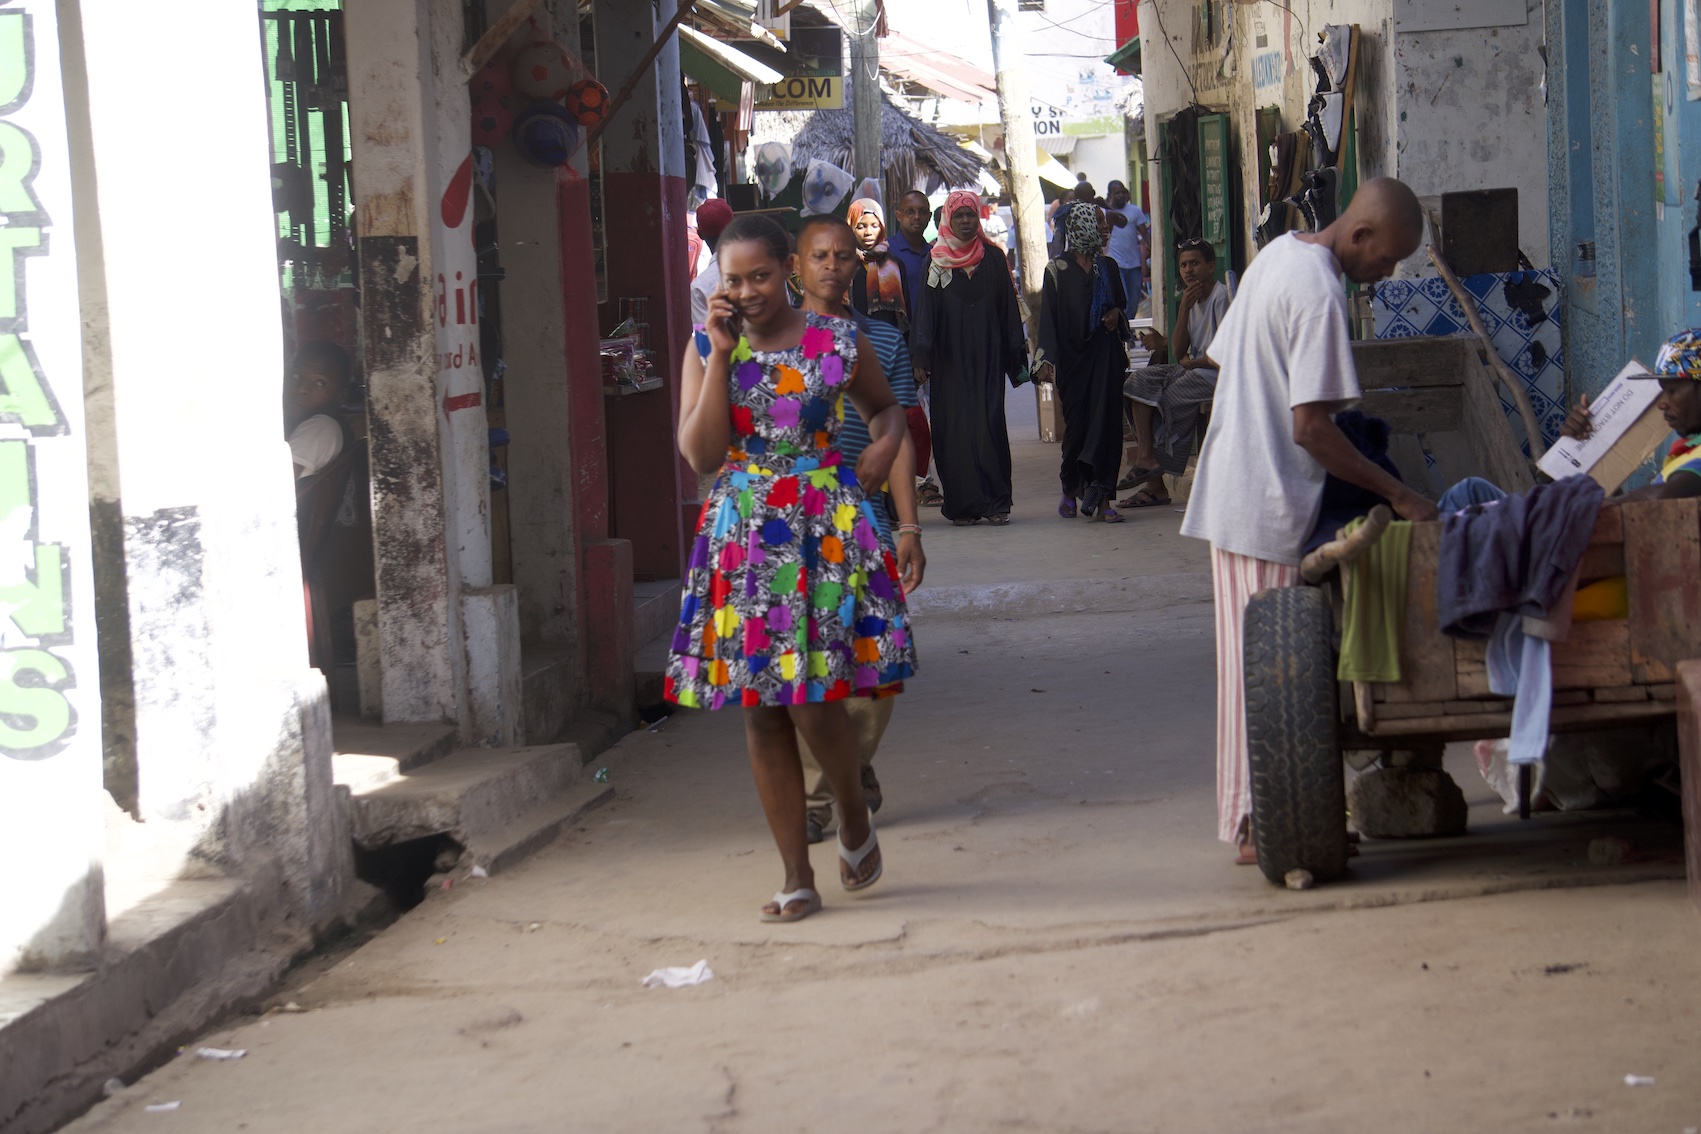 People walking on Lamu Old Town, lady in colorful dress with a phone